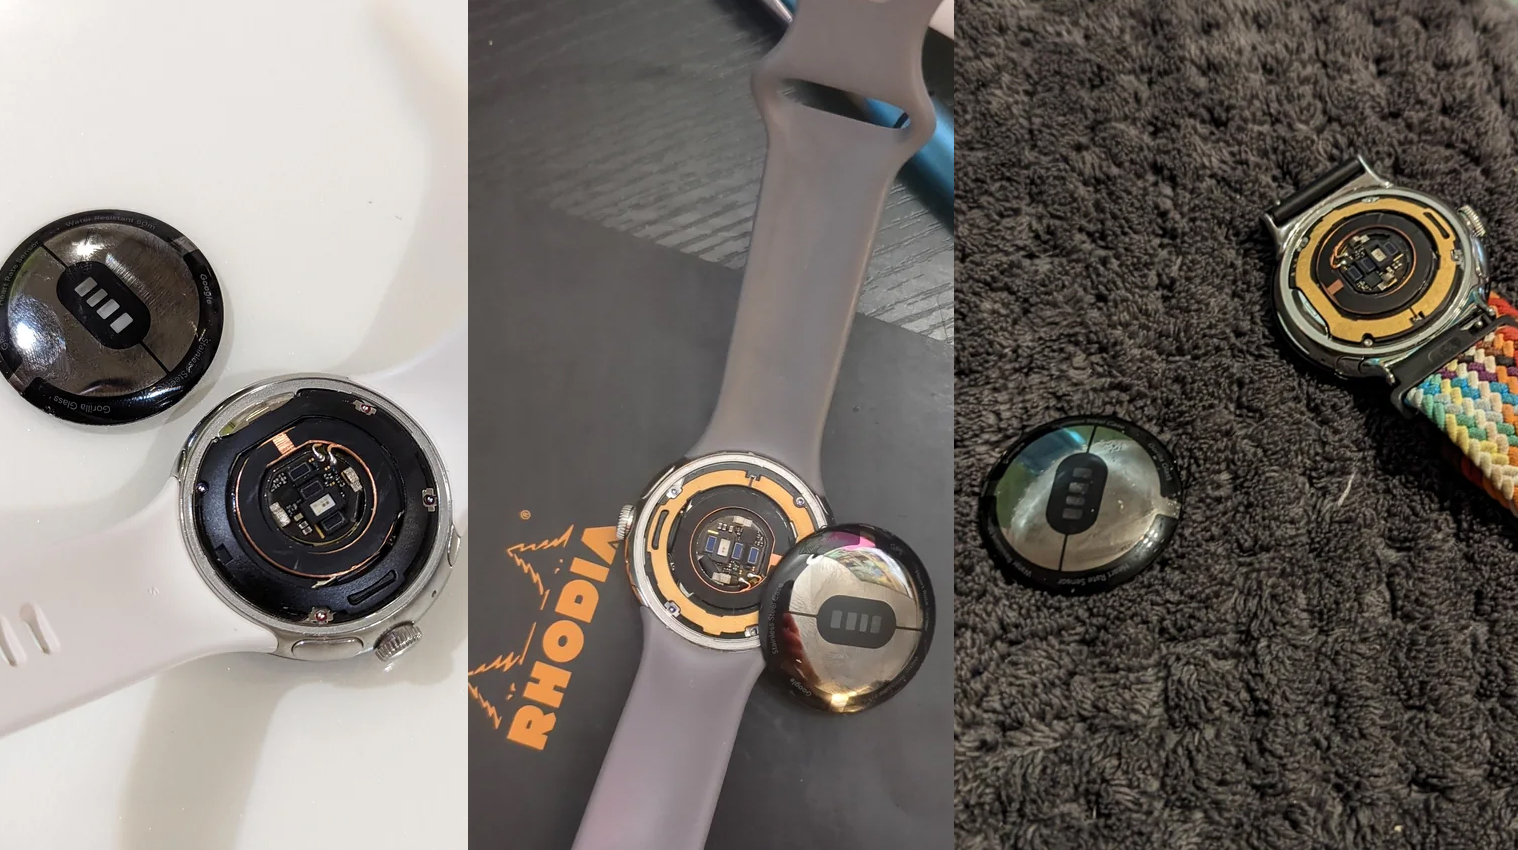 Users report their Pixel Watch backplates randomly falling off